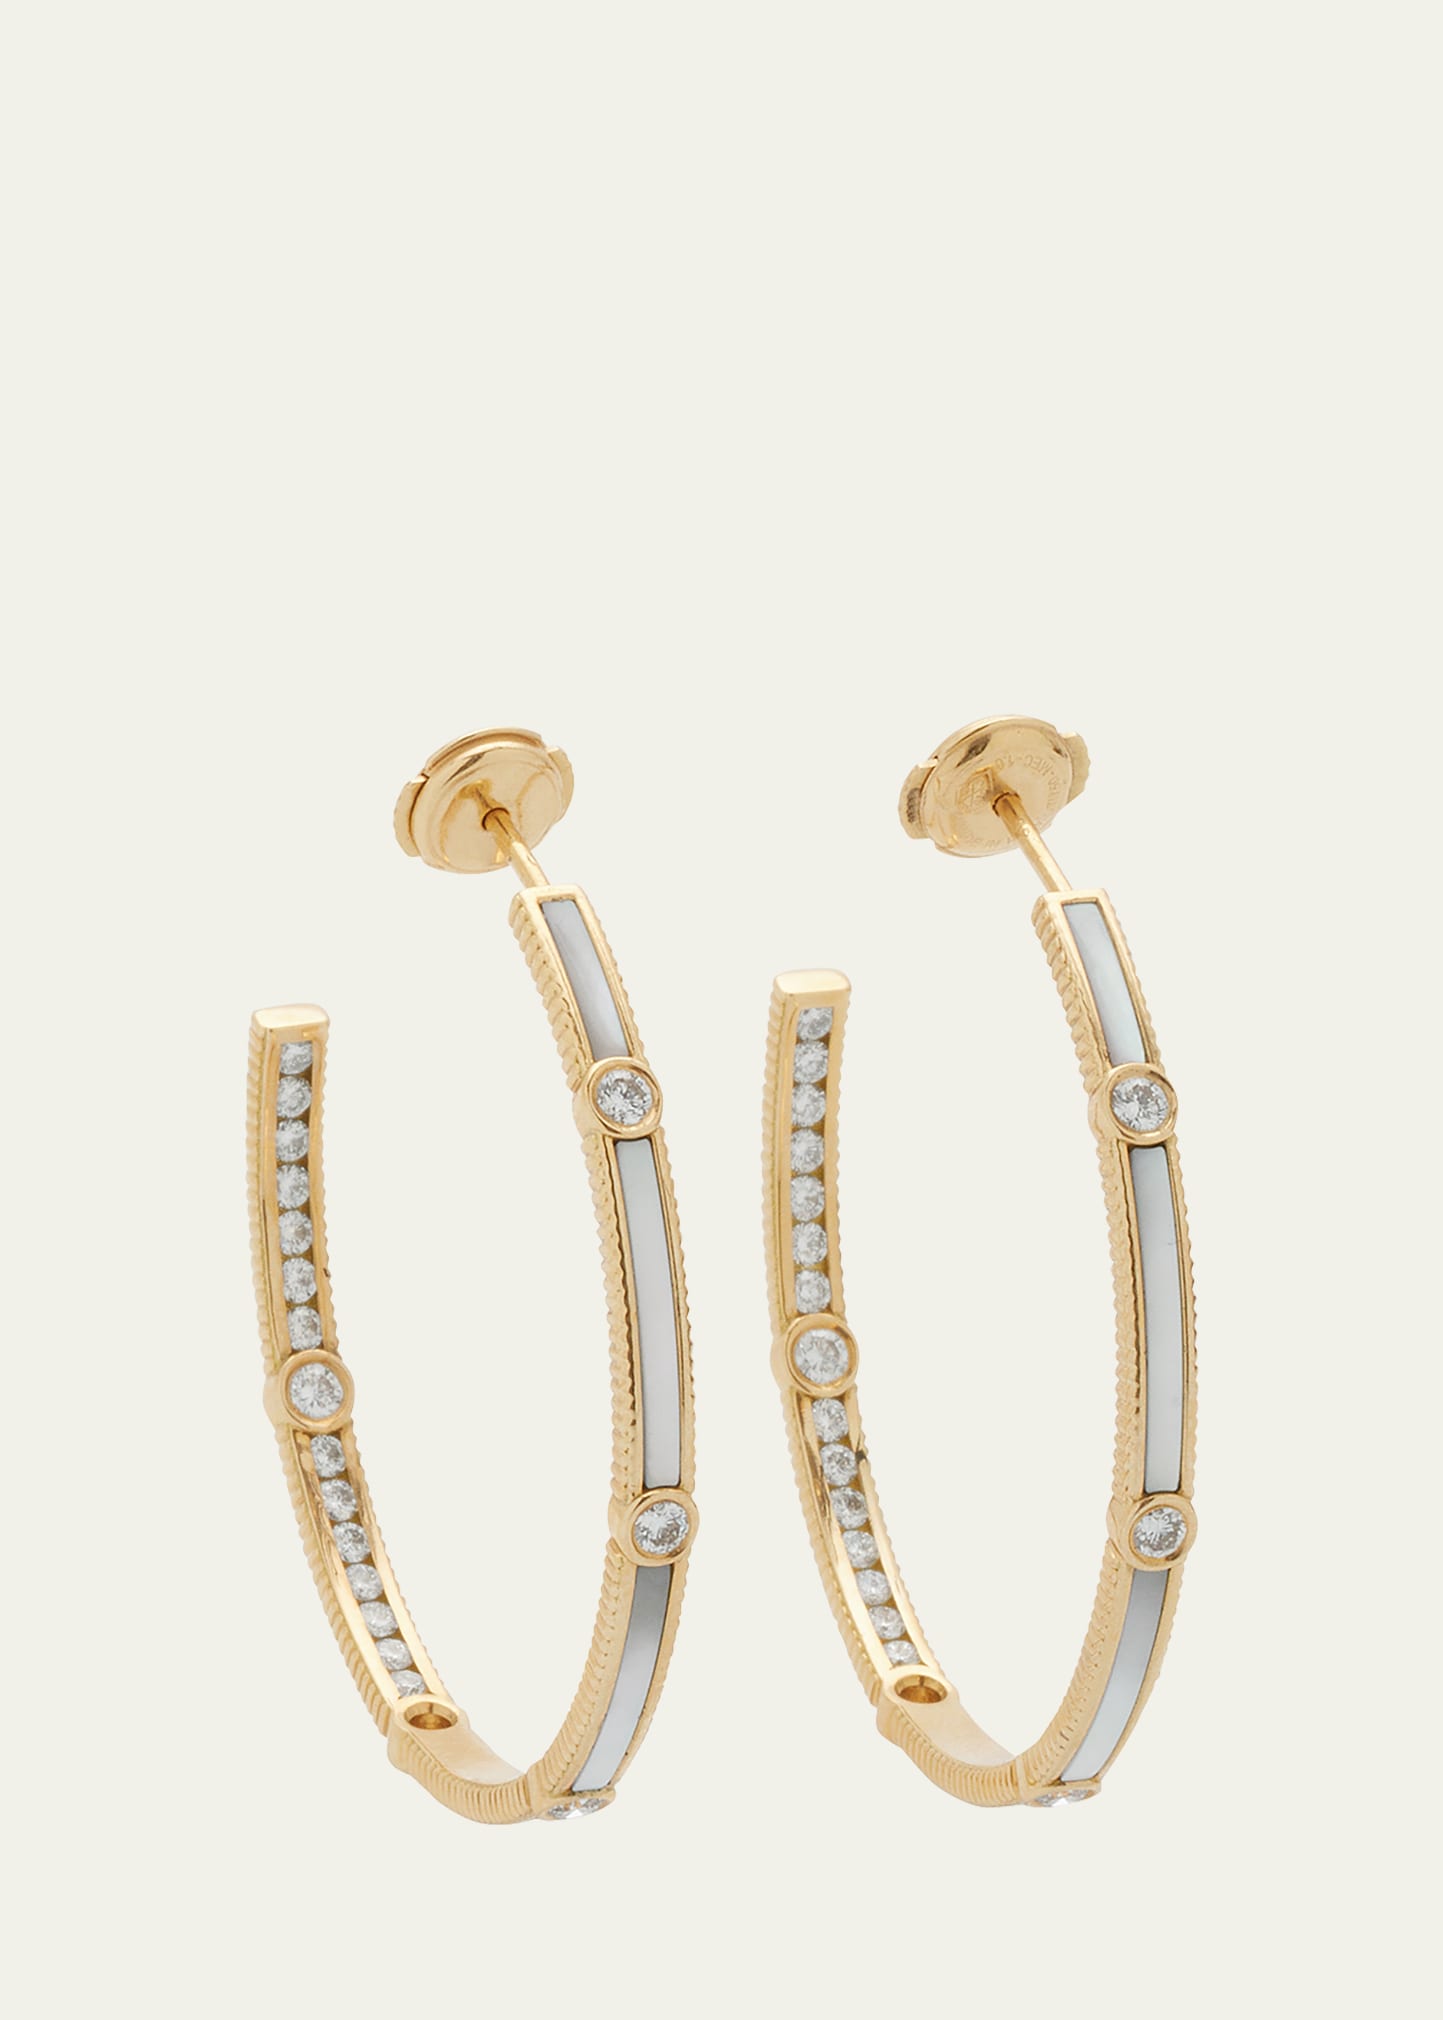 Viltier Rayon Extra-large Mother-of-pearl Hoop Earrings With 18k Yellow Gold And Diamonds In Yg